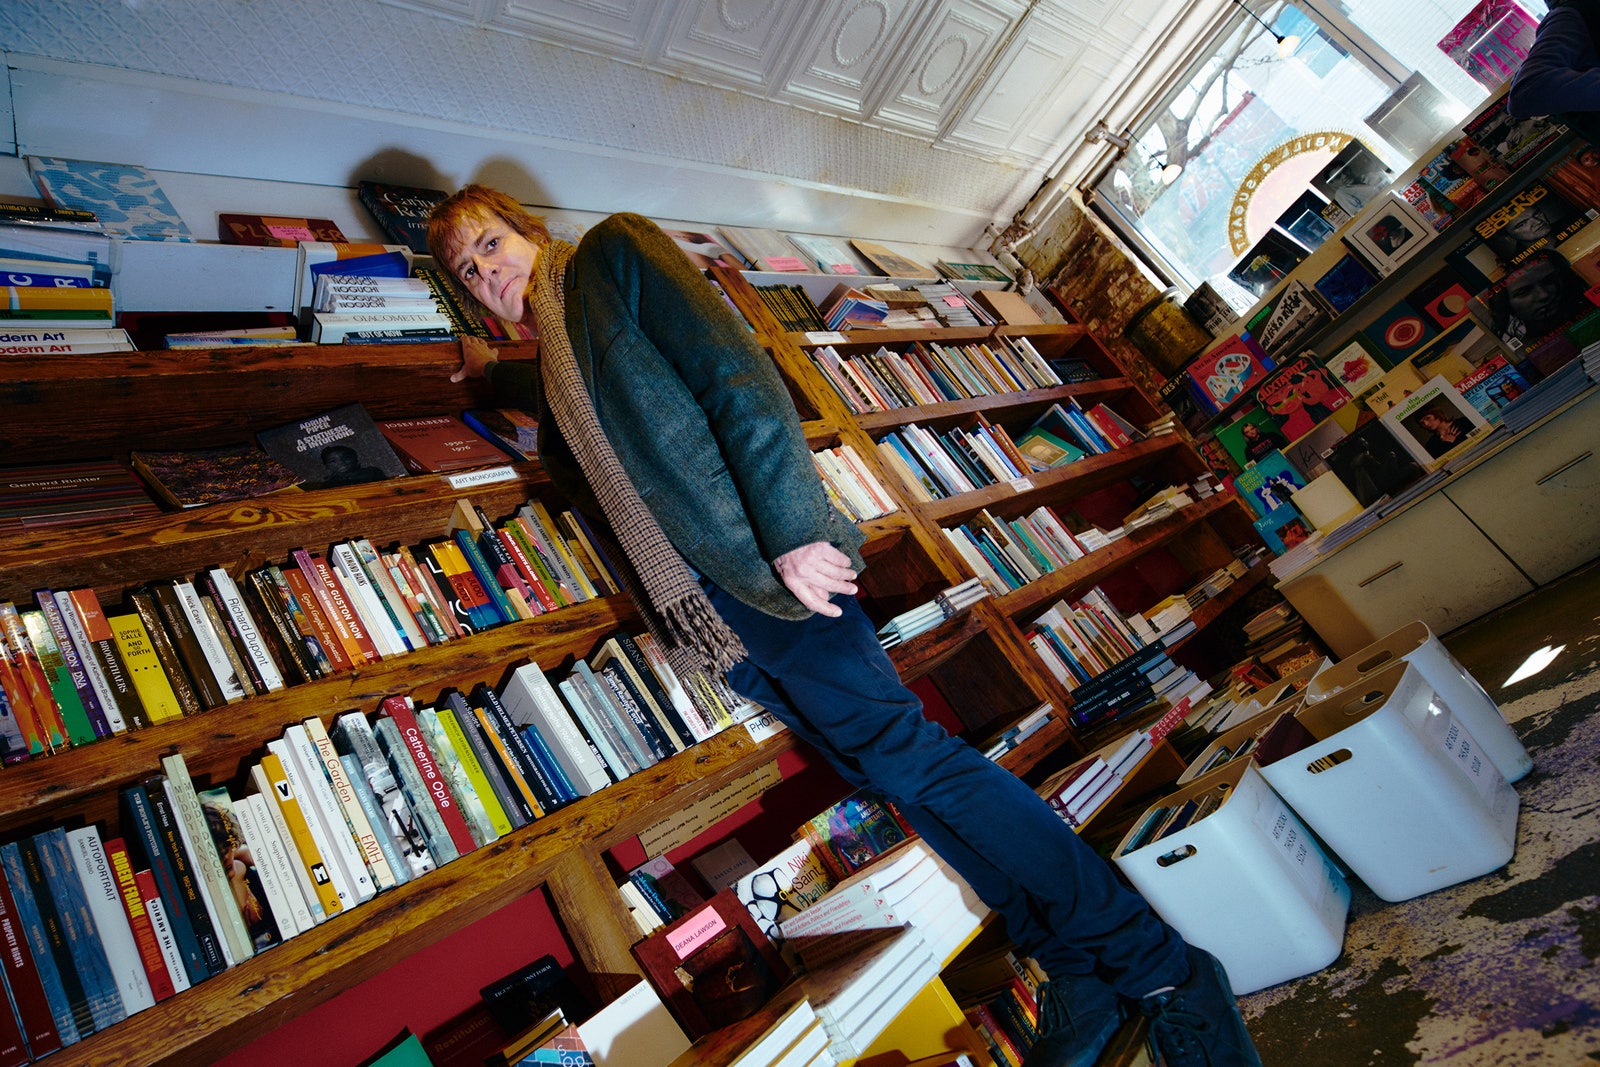 Andy Hunter standing on a step stool next to a bookshelf in a bookstore